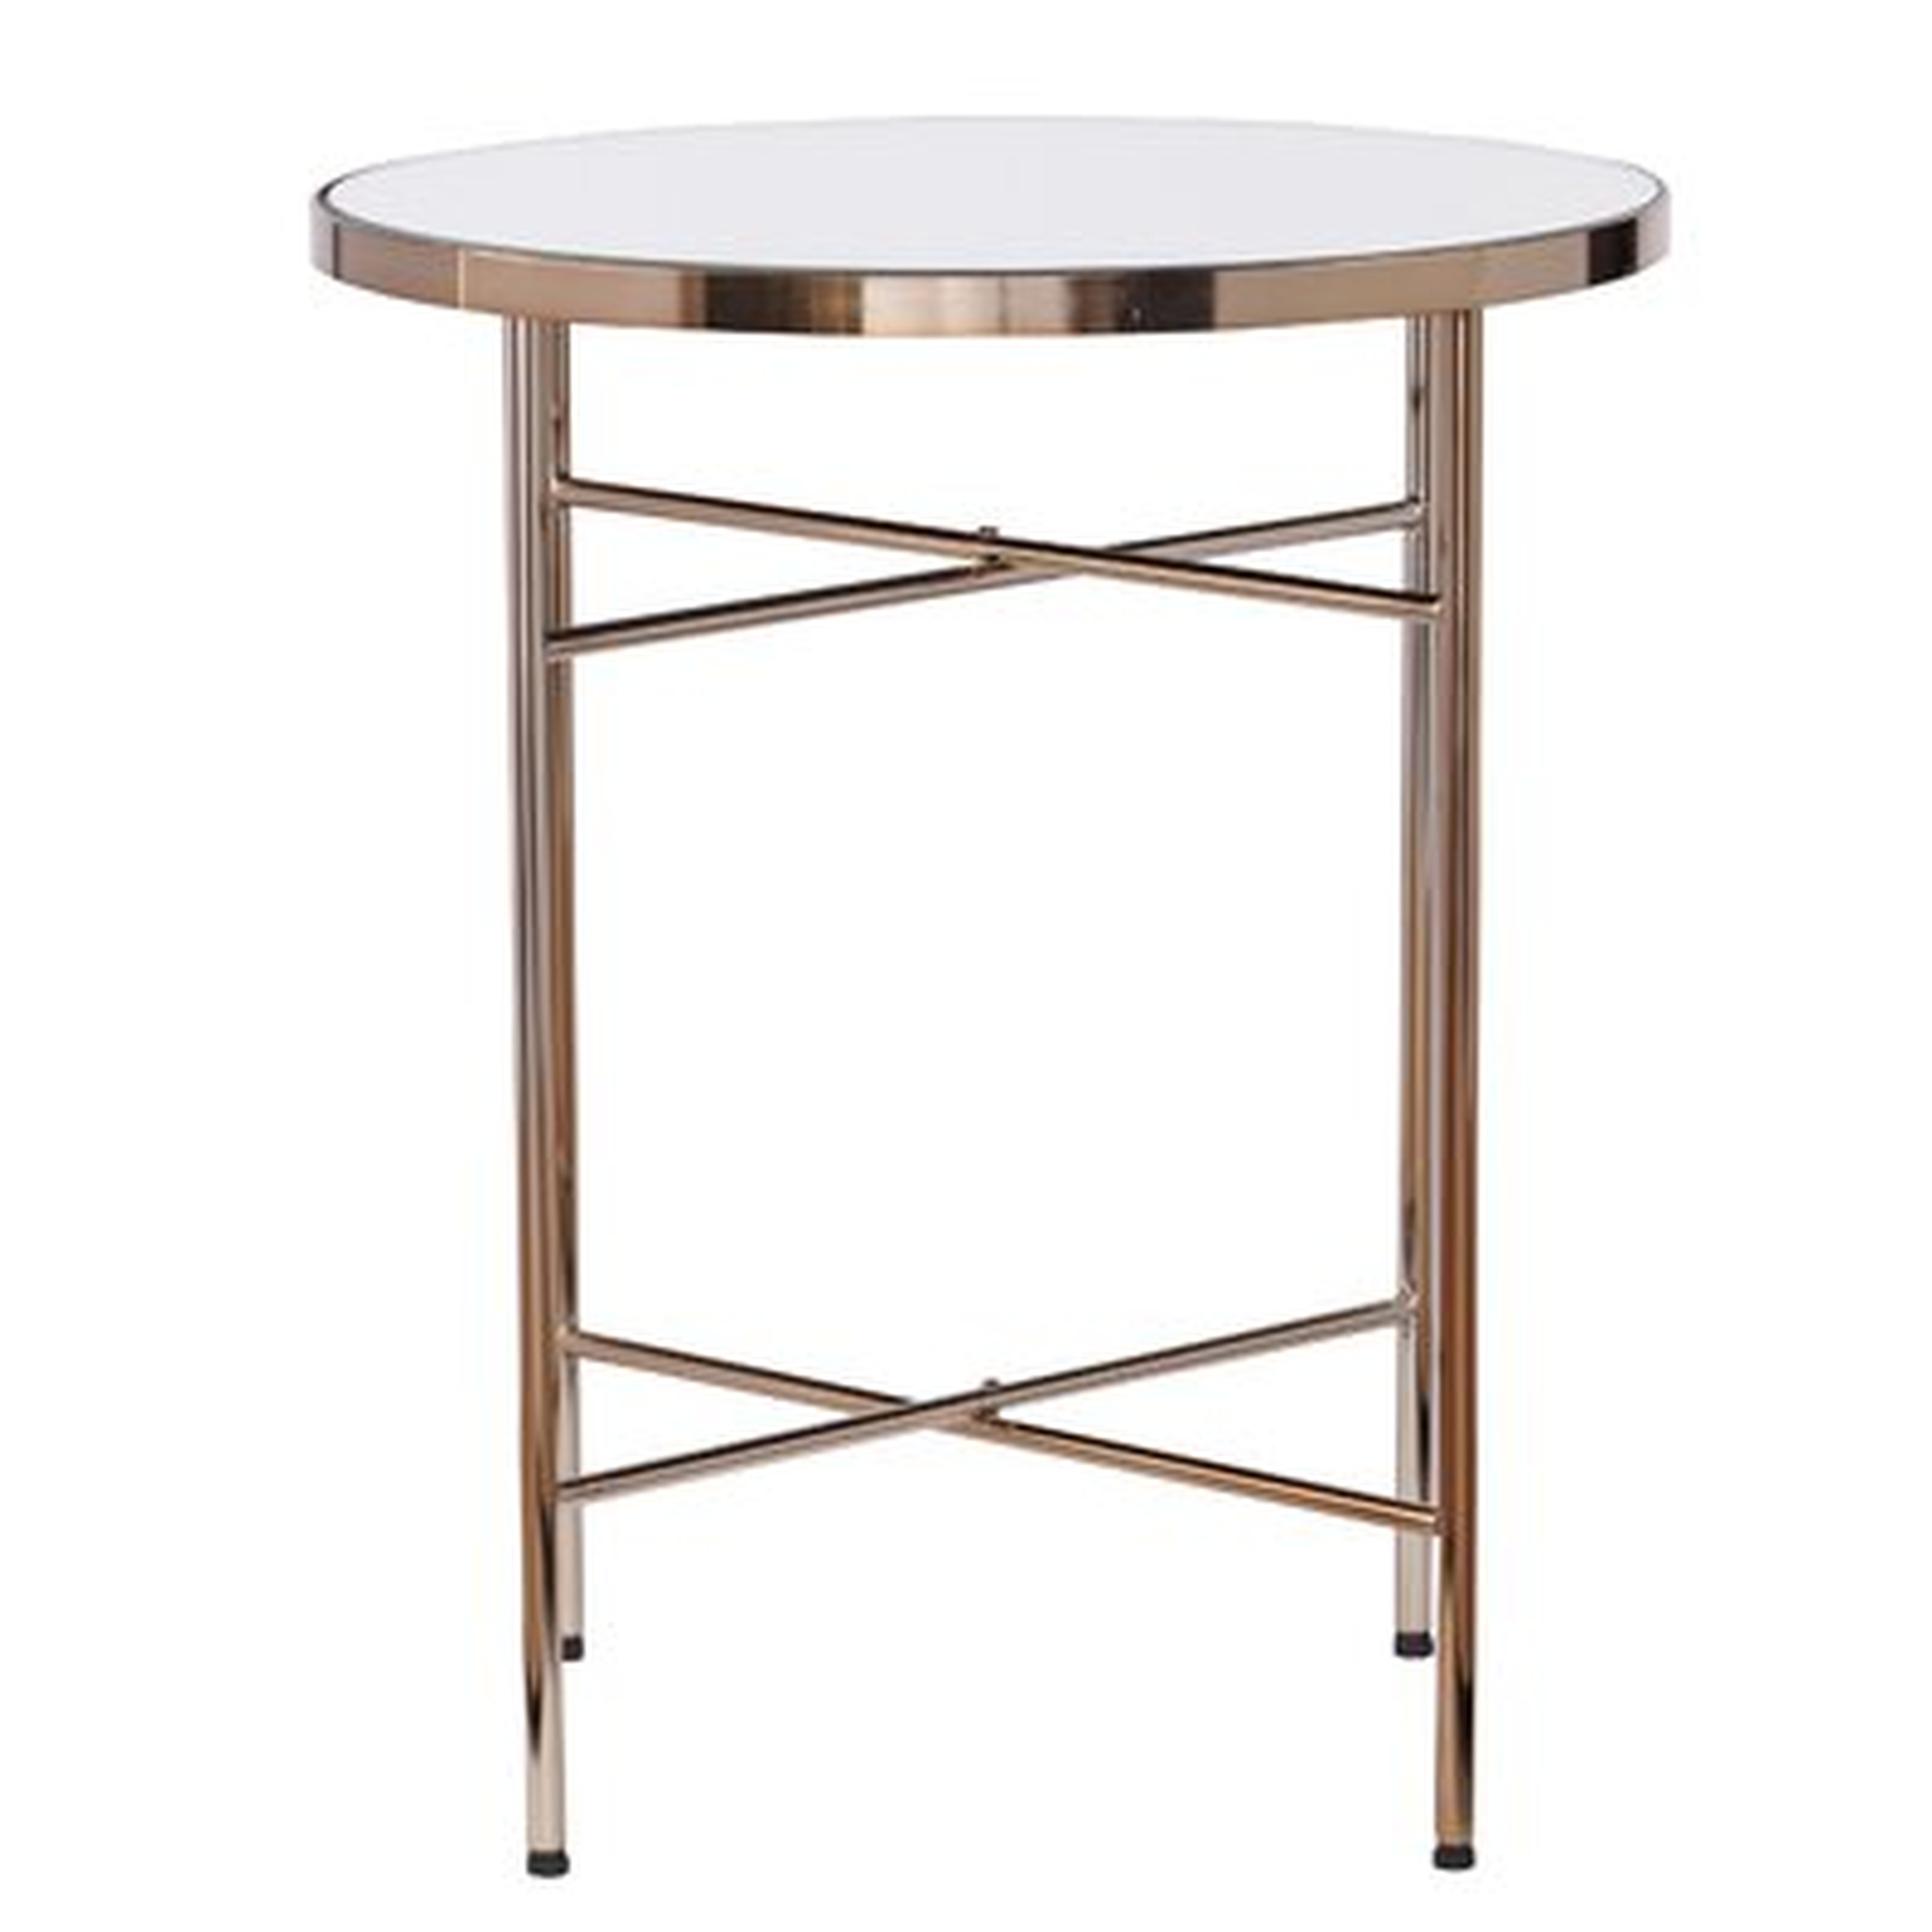 Chesson Mirrored Round End Table - Wayfair